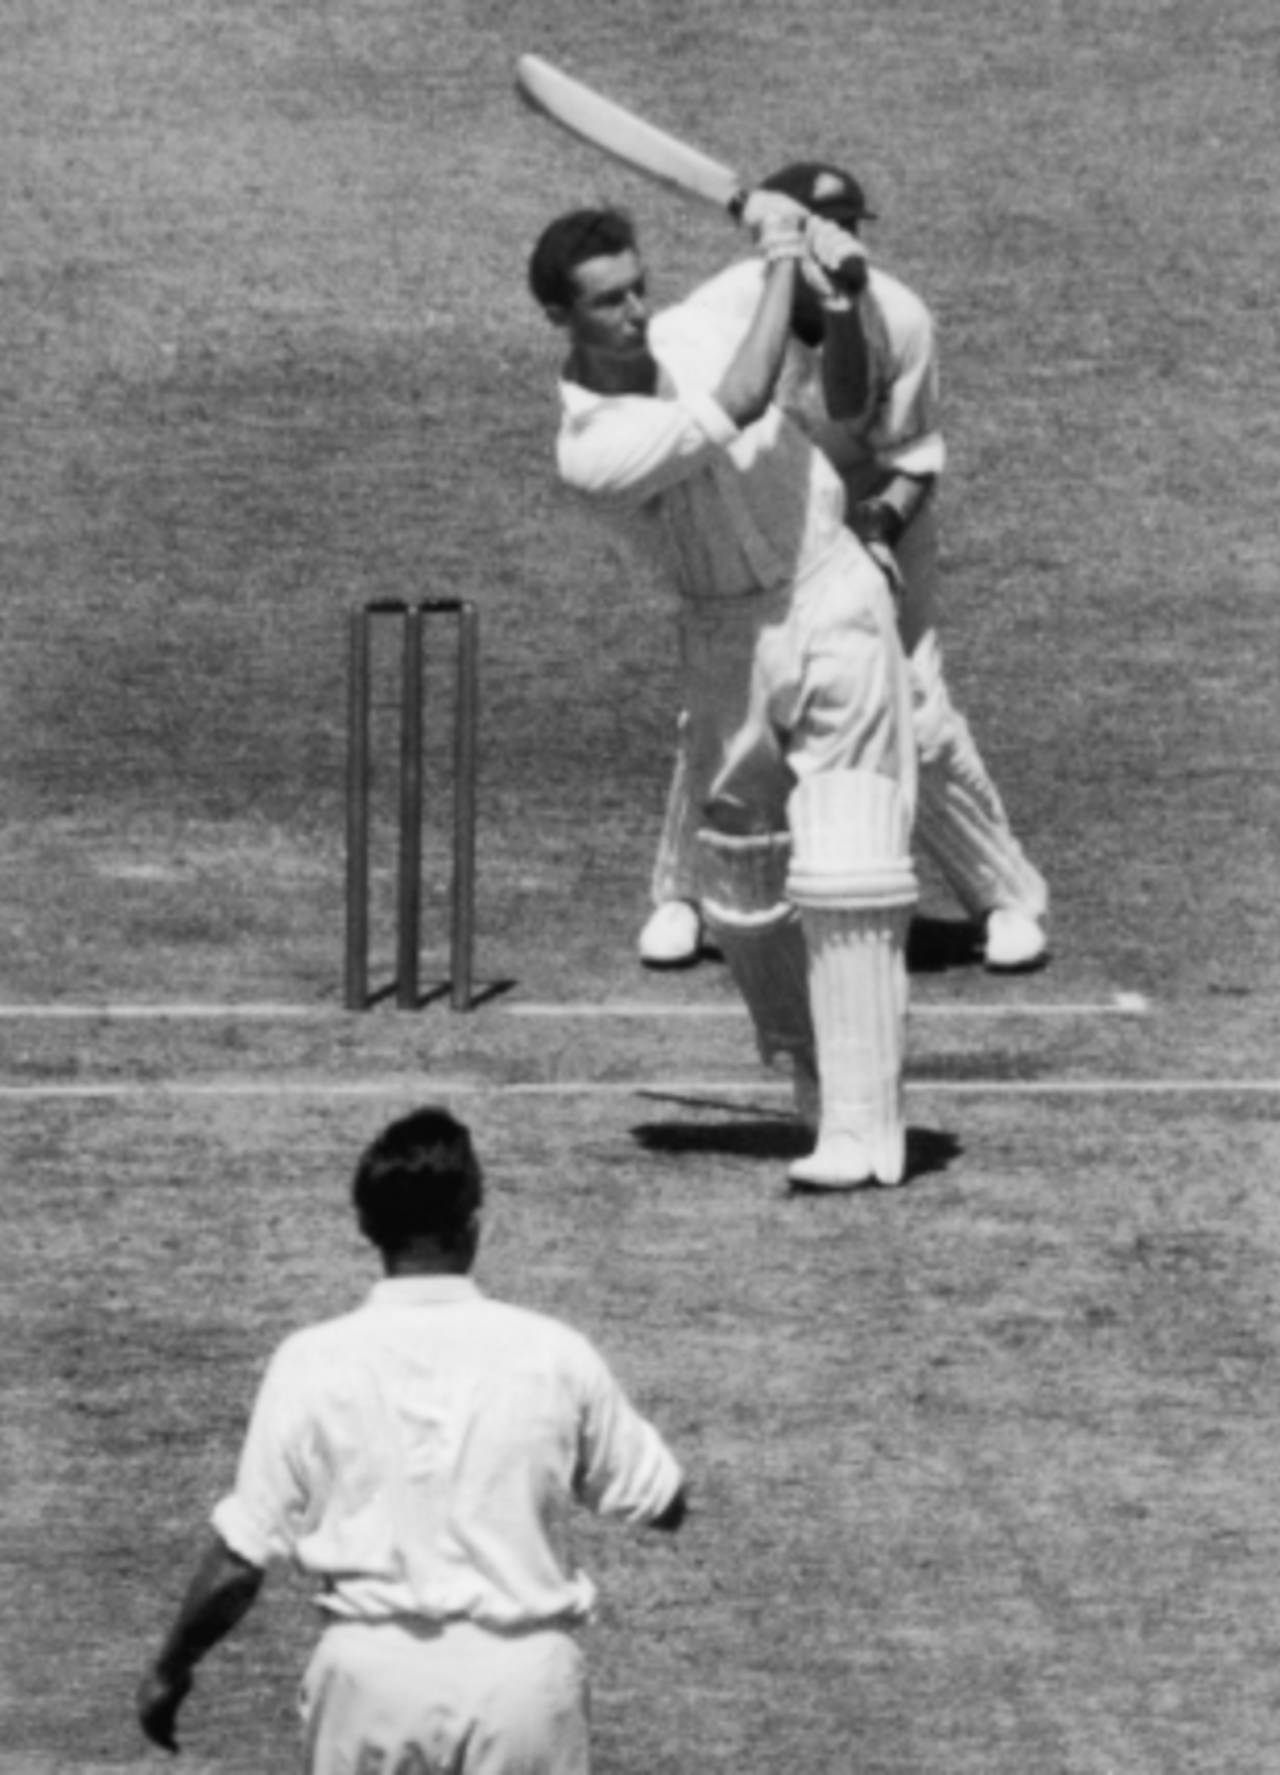 Tall, tanned and capless: Reg Simpson takes on the South Africans at Lord's, June 1951&nbsp;&nbsp;&bull;&nbsp;&nbsp;Getty Images